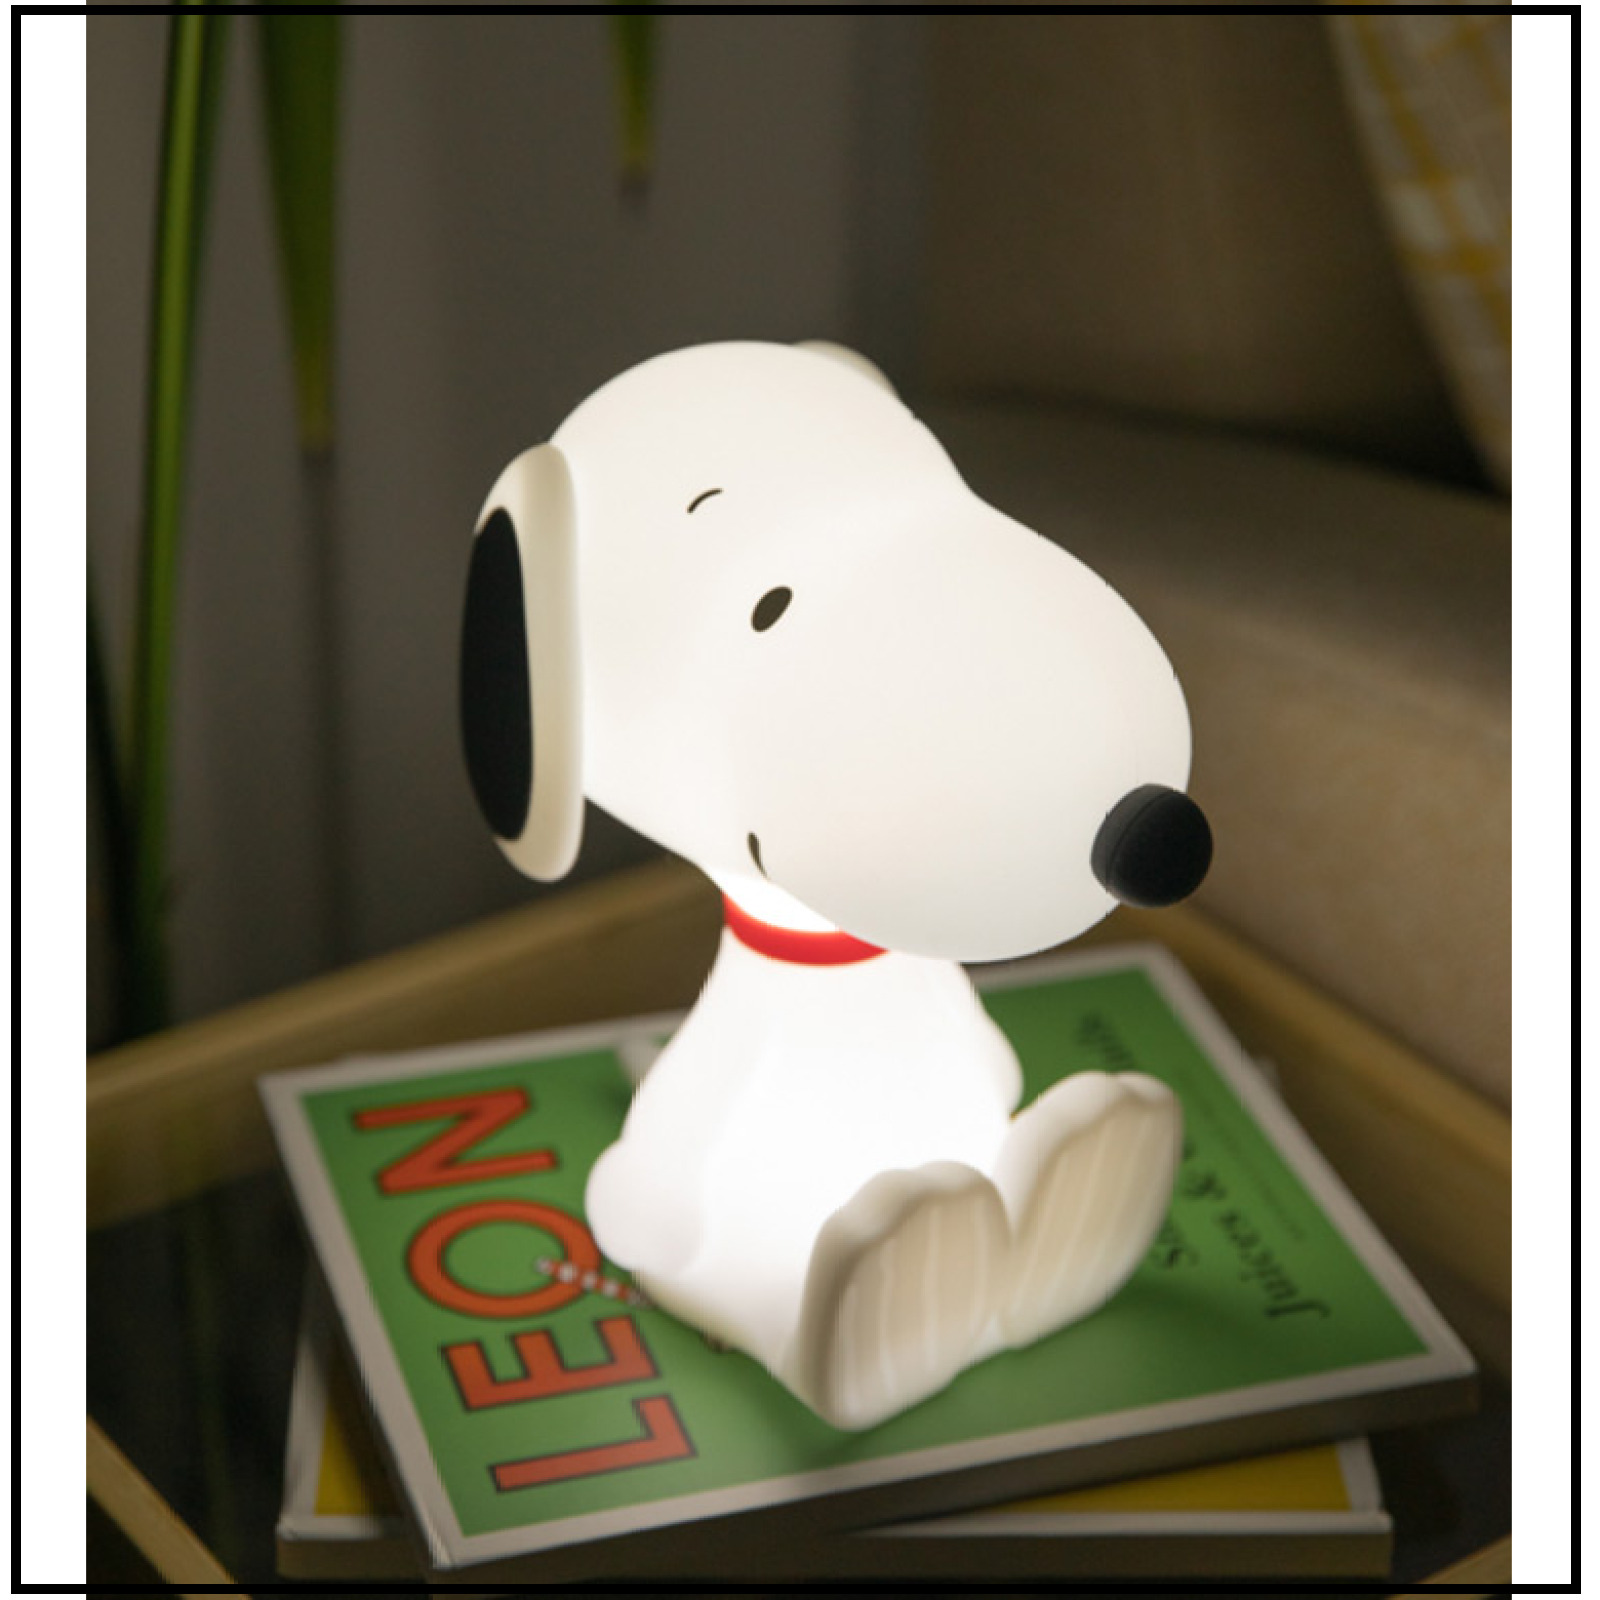 [ SNOOPY PEANUTS * ] TOUCH MOOD LAMP Night Light Lamp Limited Edition